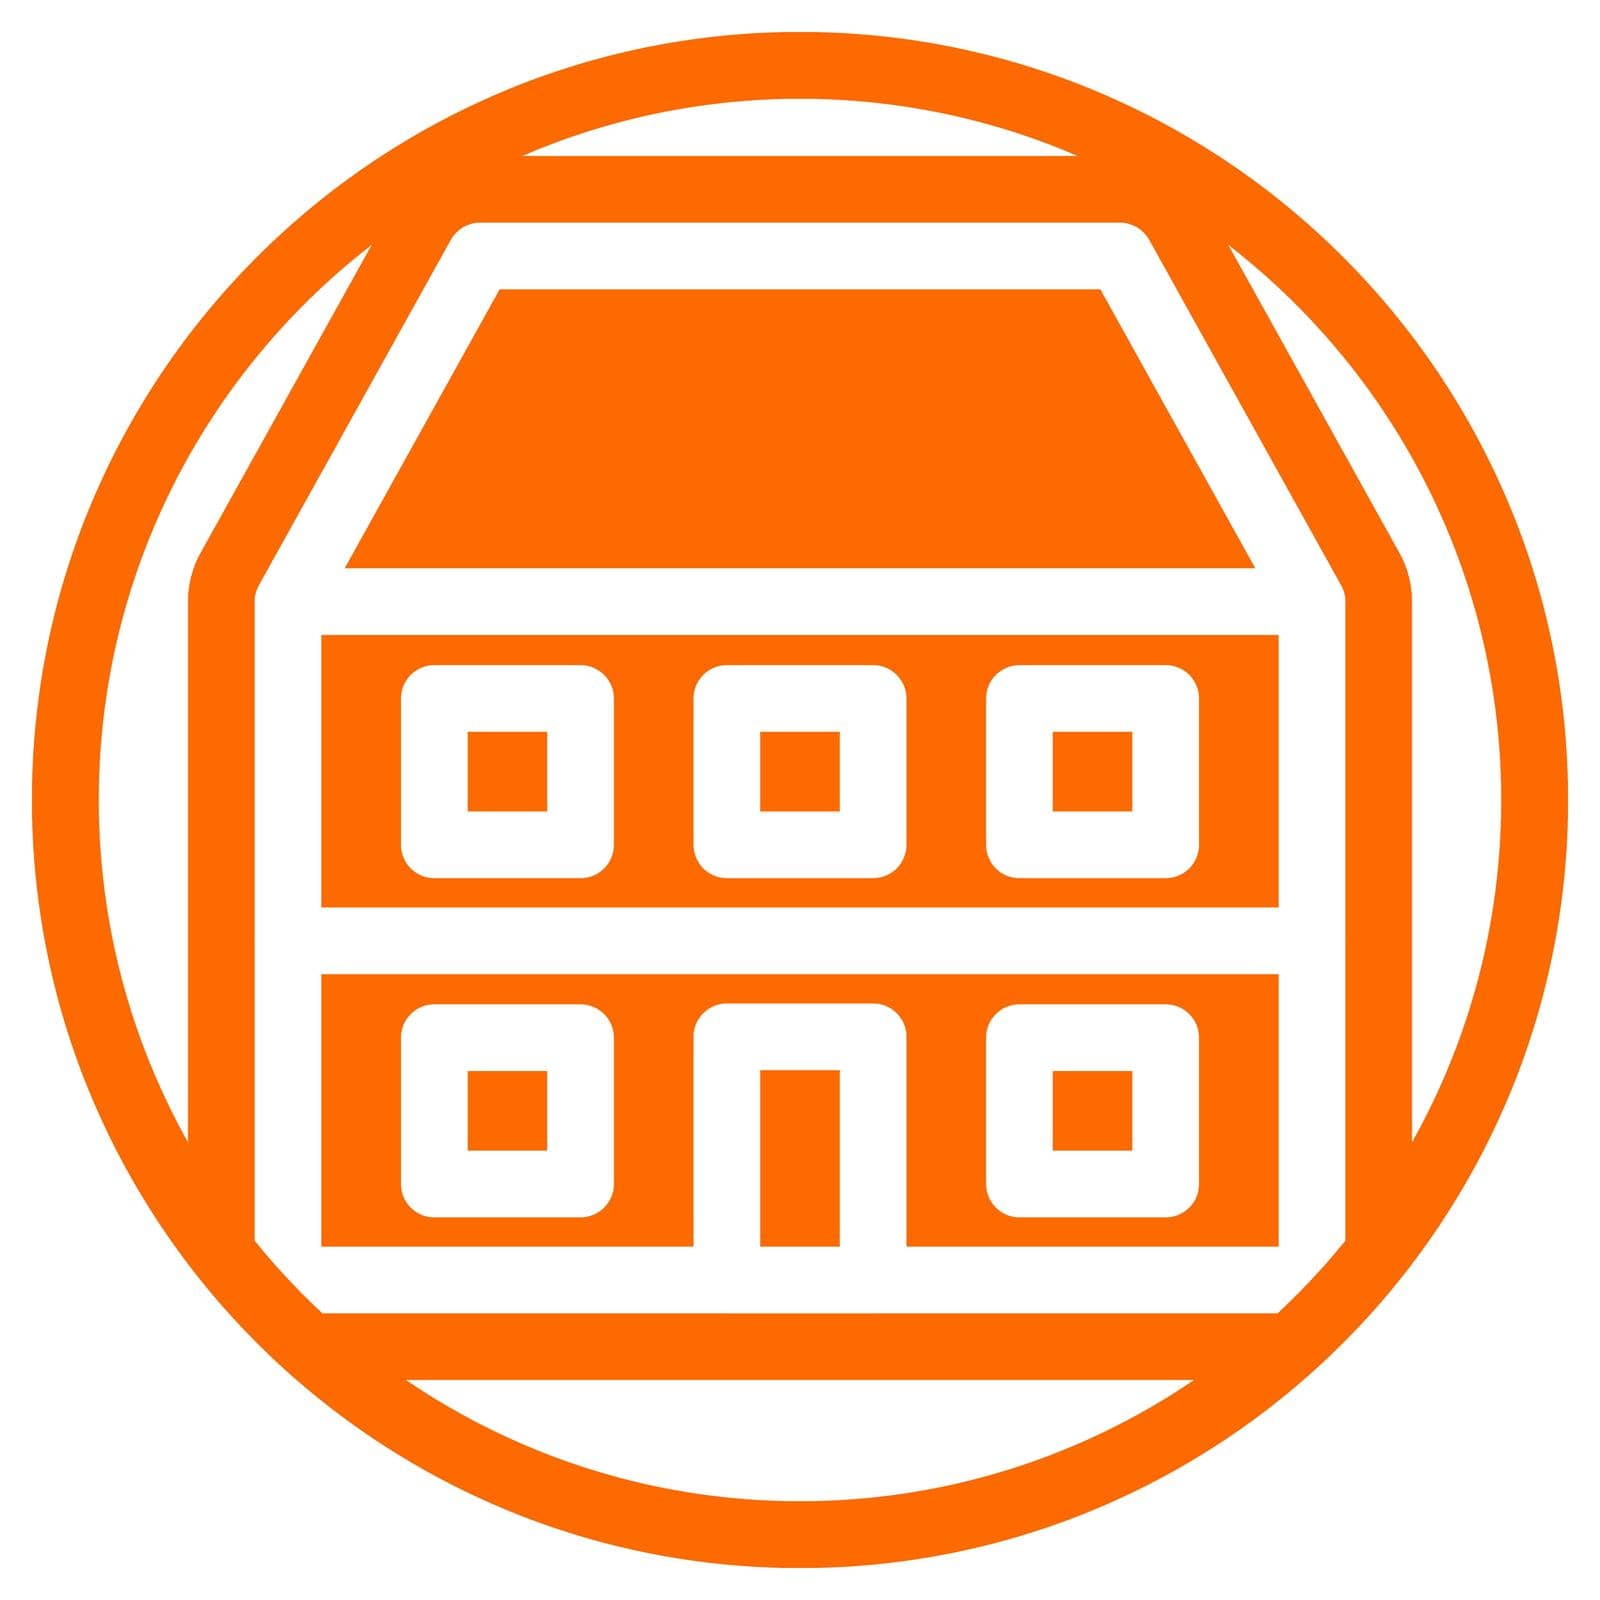 Apartment icon in flat design with orange color and outline on a line circle background.